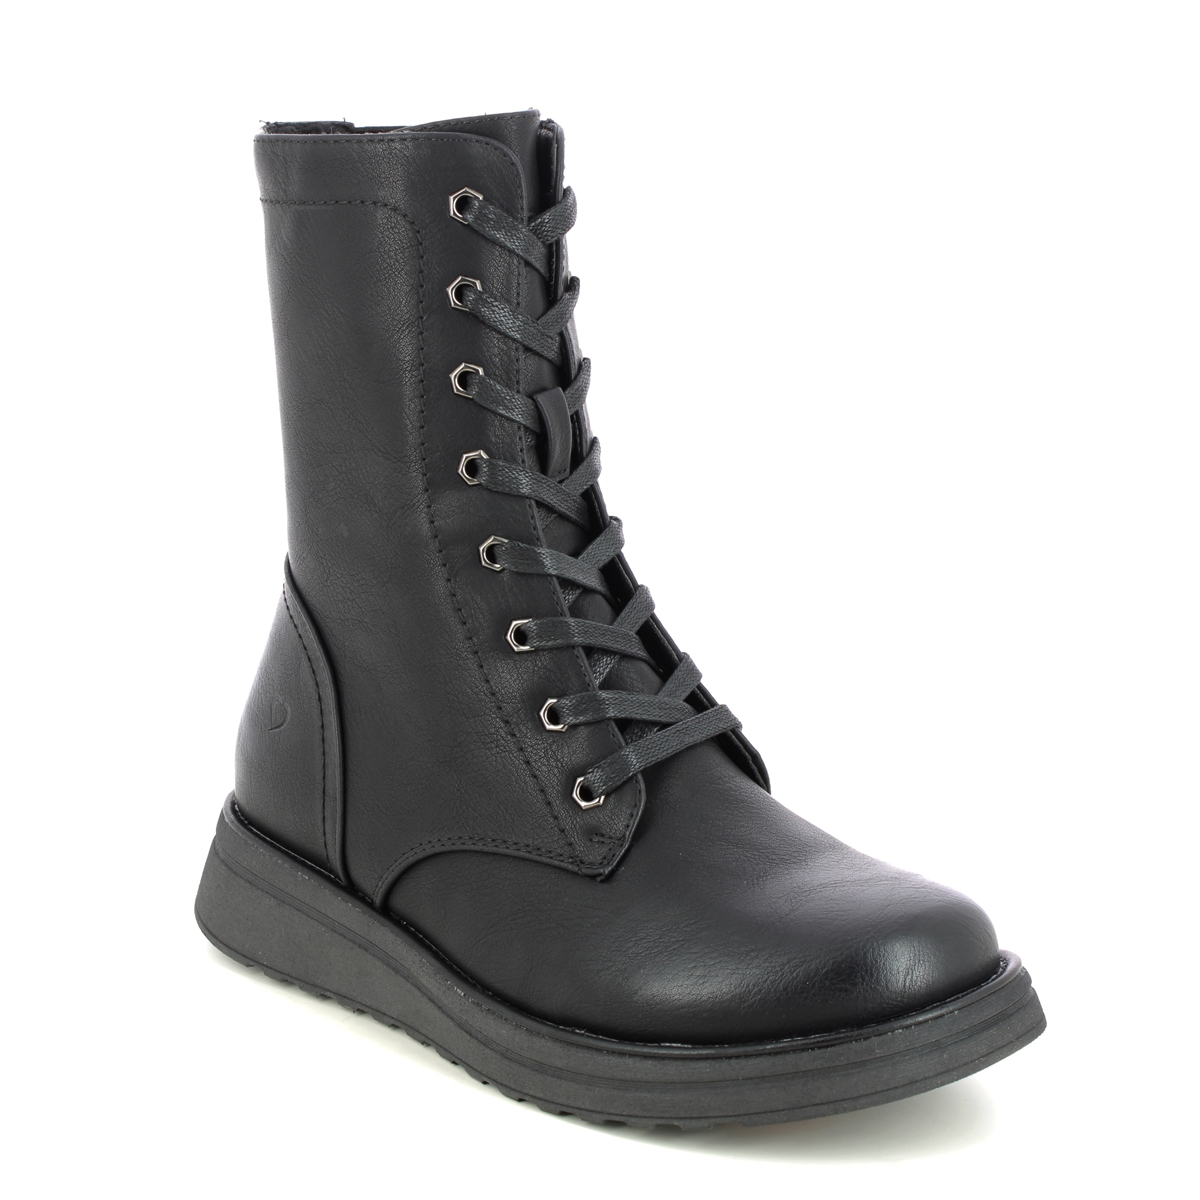 Heavenly Feet Martina Walker Black Womens Lace Up Boots 3509-34 In Size 7 In Plain Black